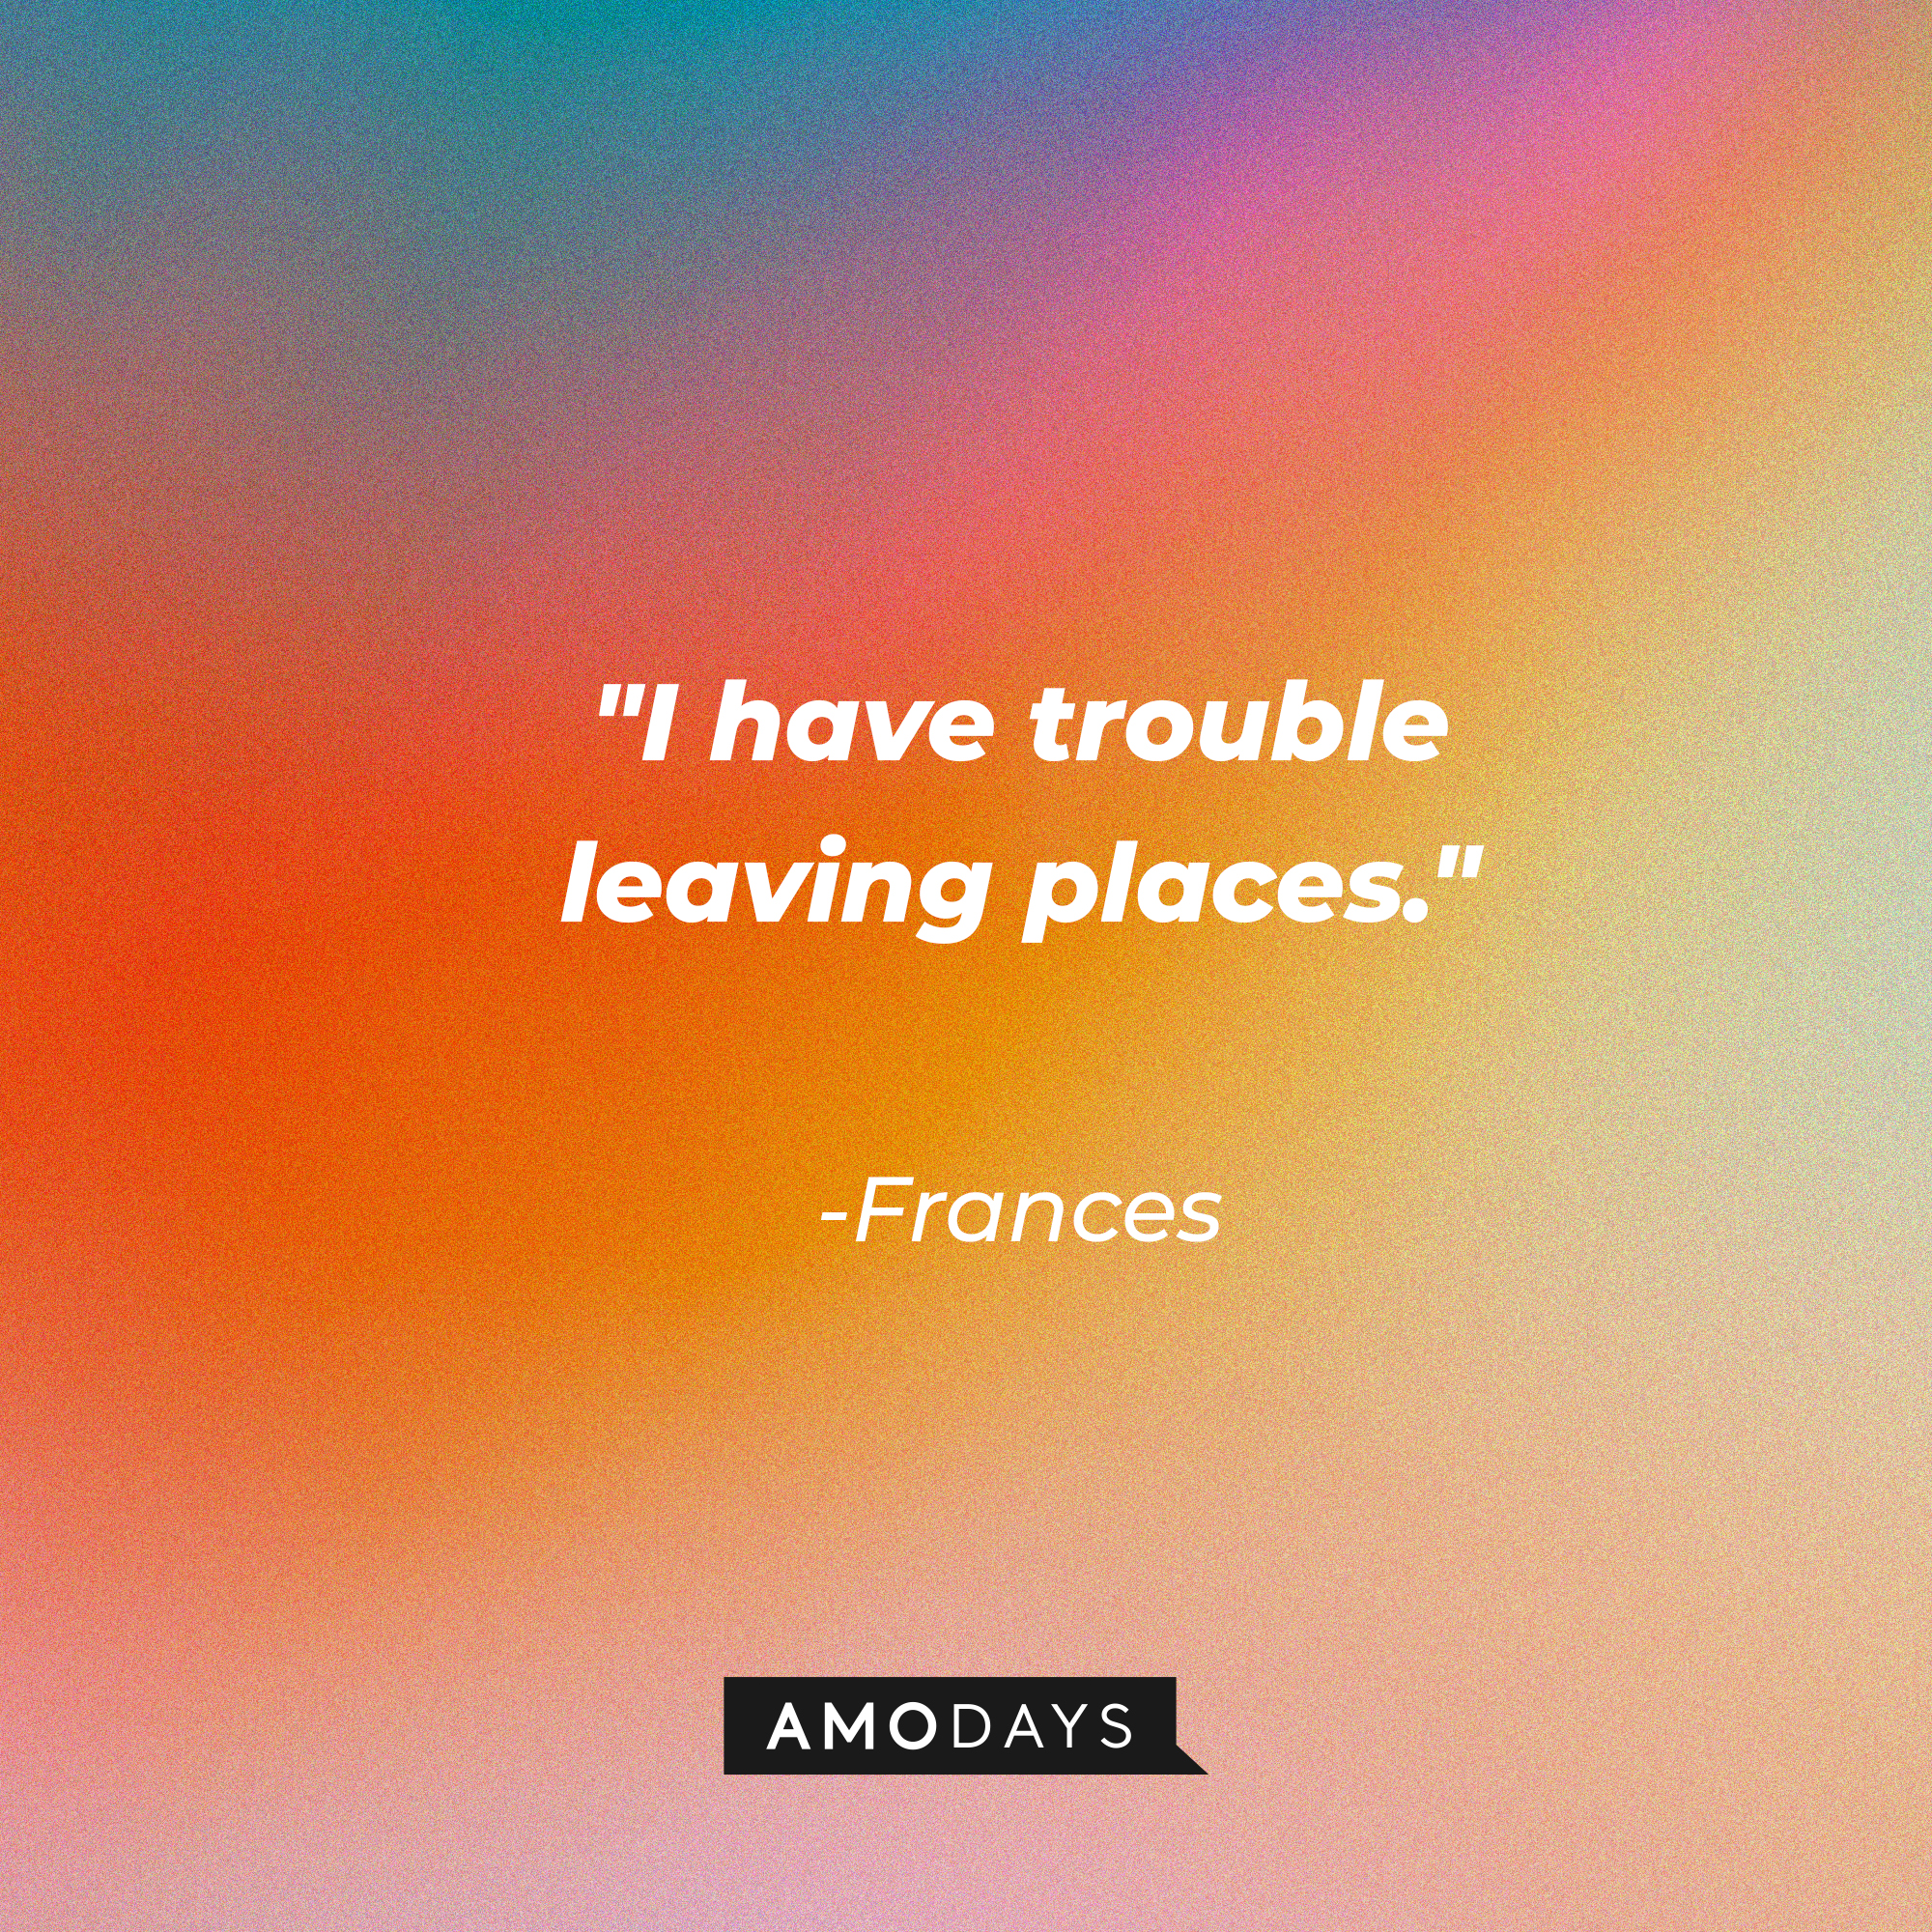 Frances' quote: "I have trouble leaving places." | Source: AmoDays